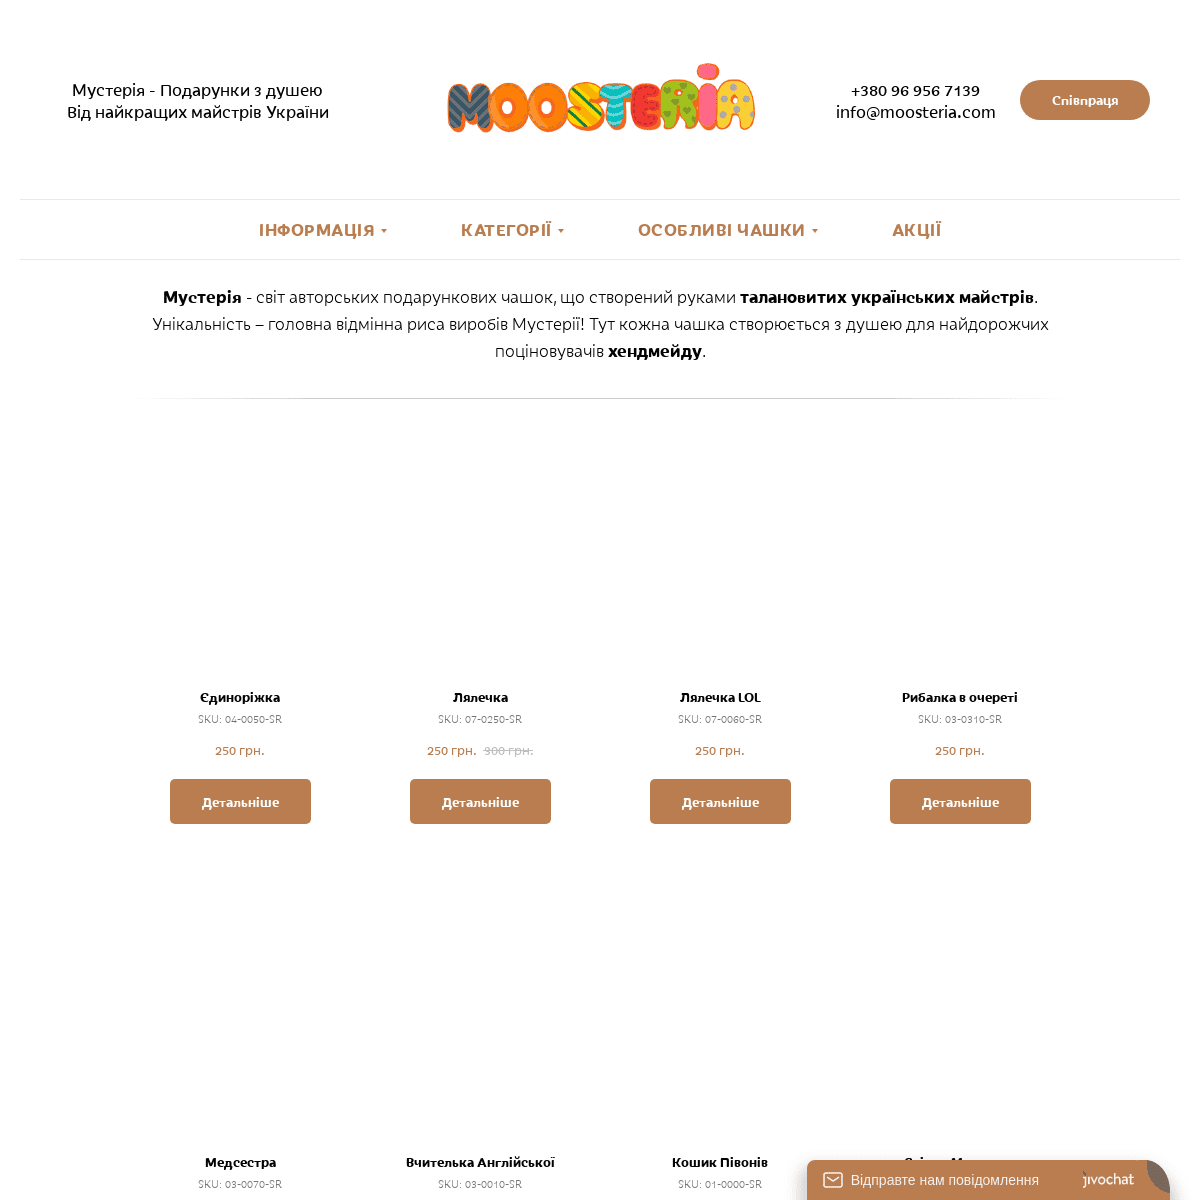 A complete backup of moosteria.com